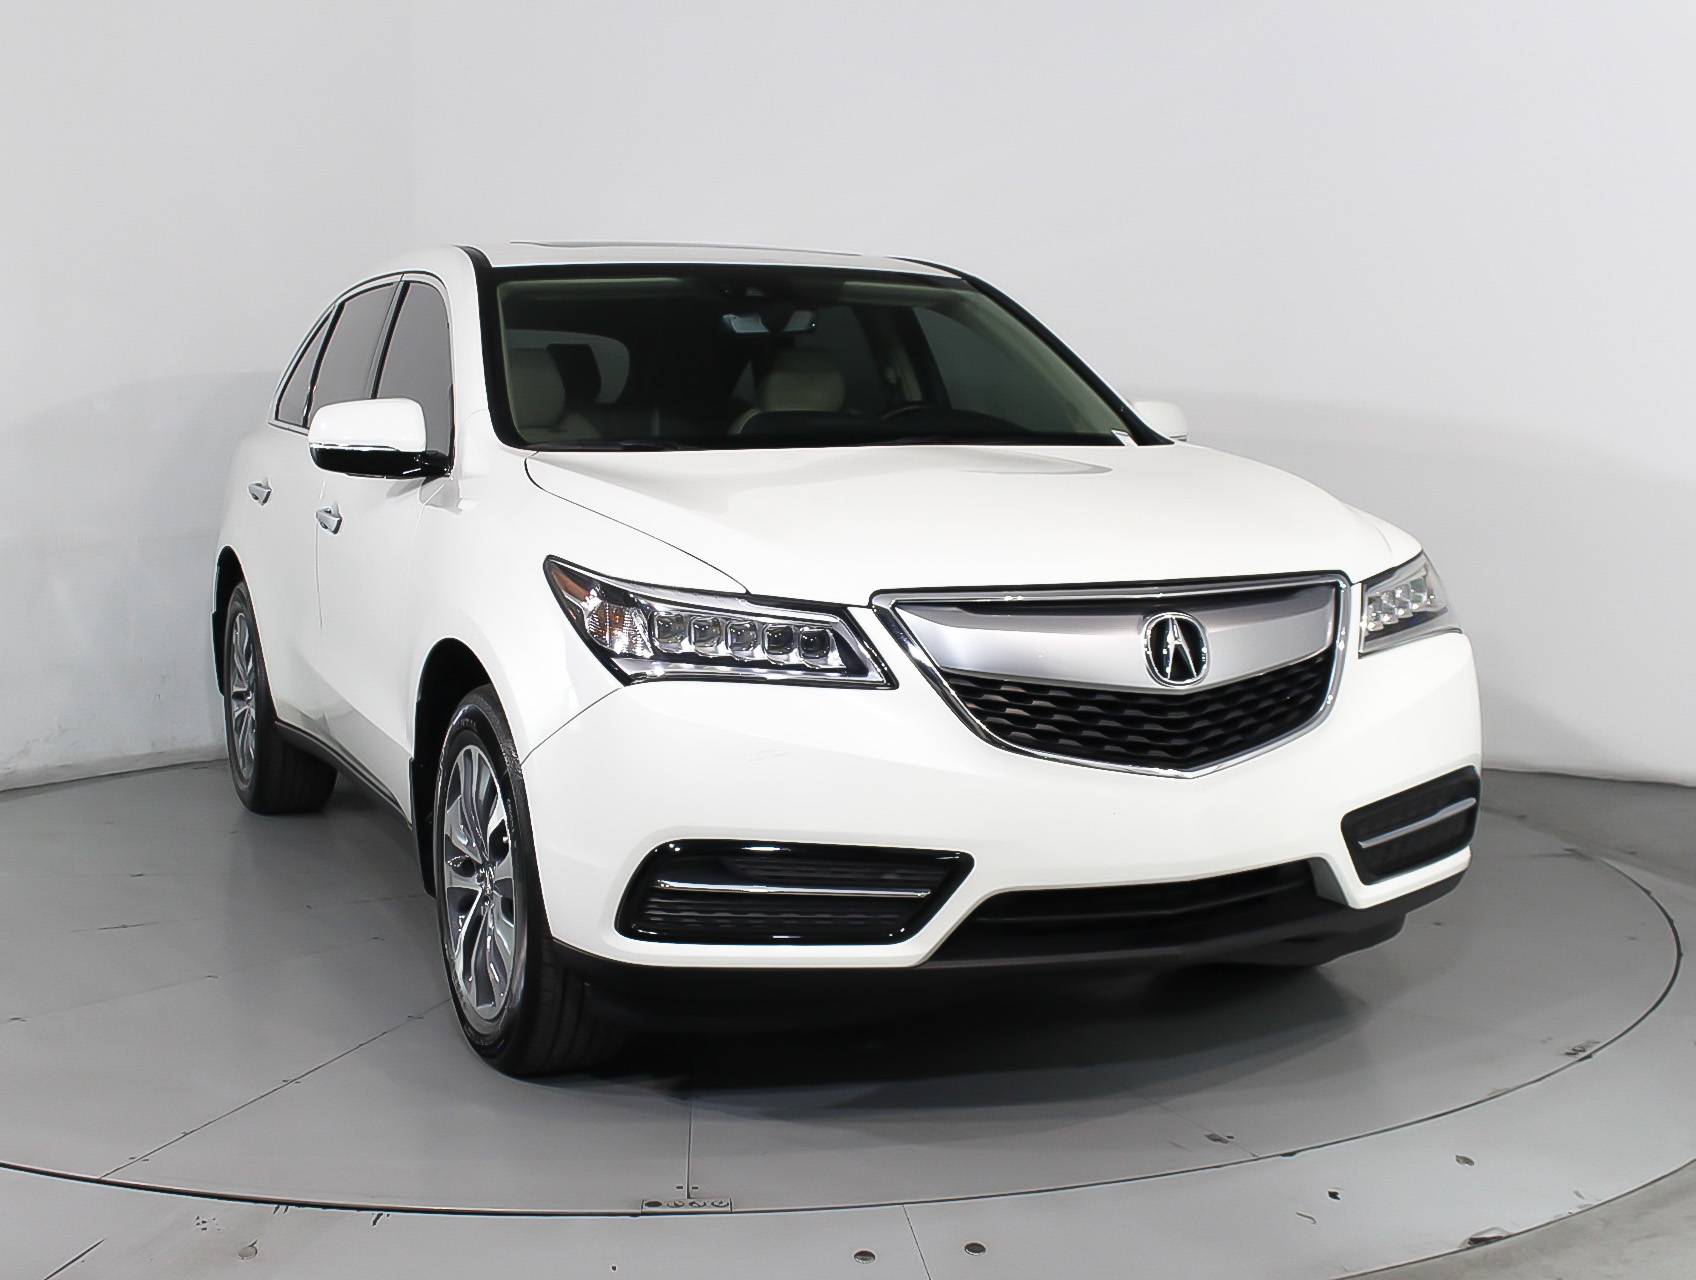 Florida Fine Cars - Used ACURA MDX 2016 MIAMI TECHNOLOGY PACKAGE